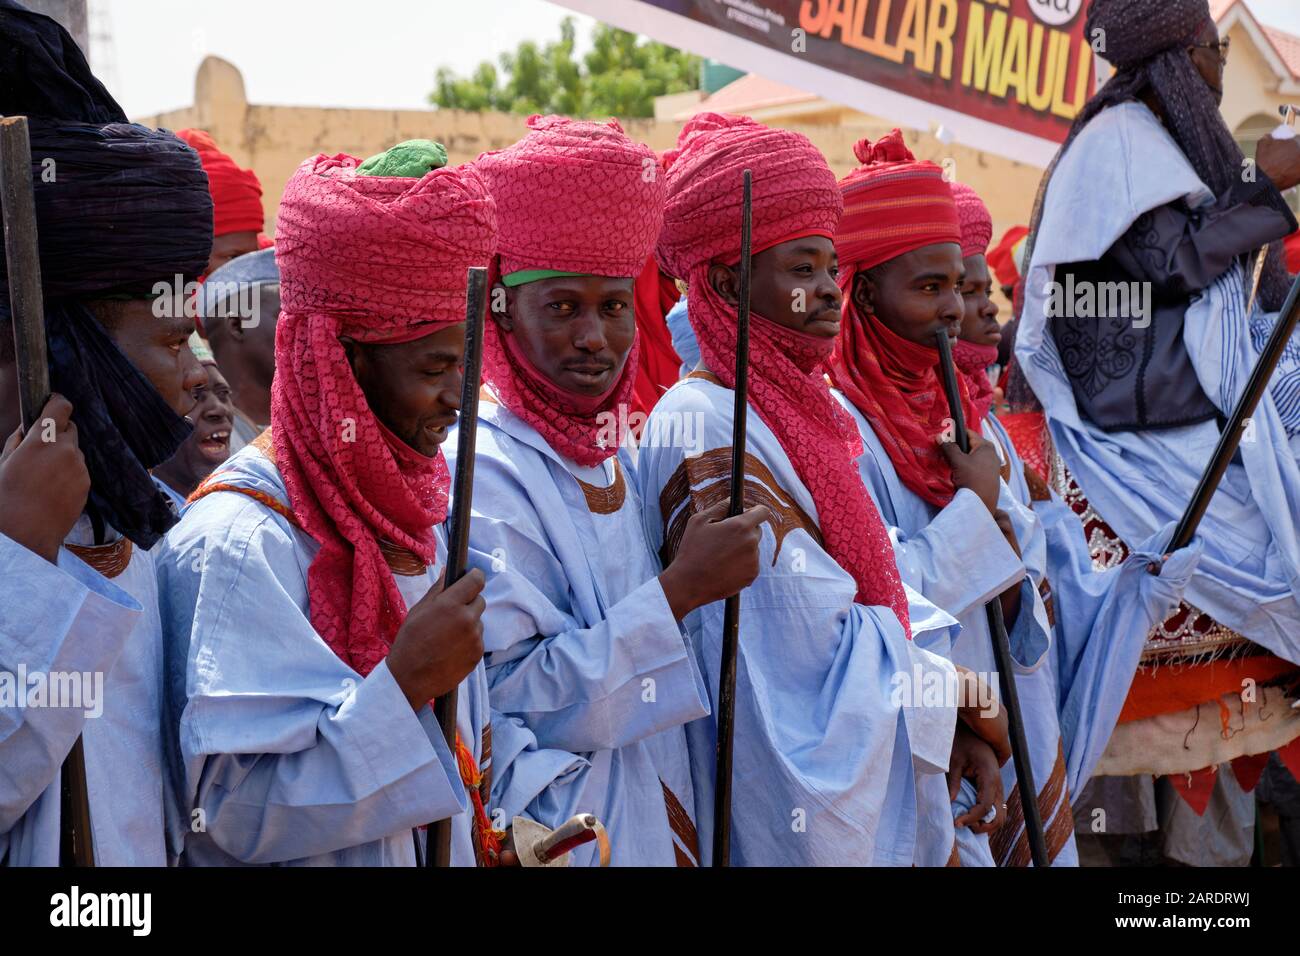 Escort of the Emir during a durbar. A durbar is a celebration in northern Nigeria in which the noblemen of the area pay respects to the local ruler. Stock Photo